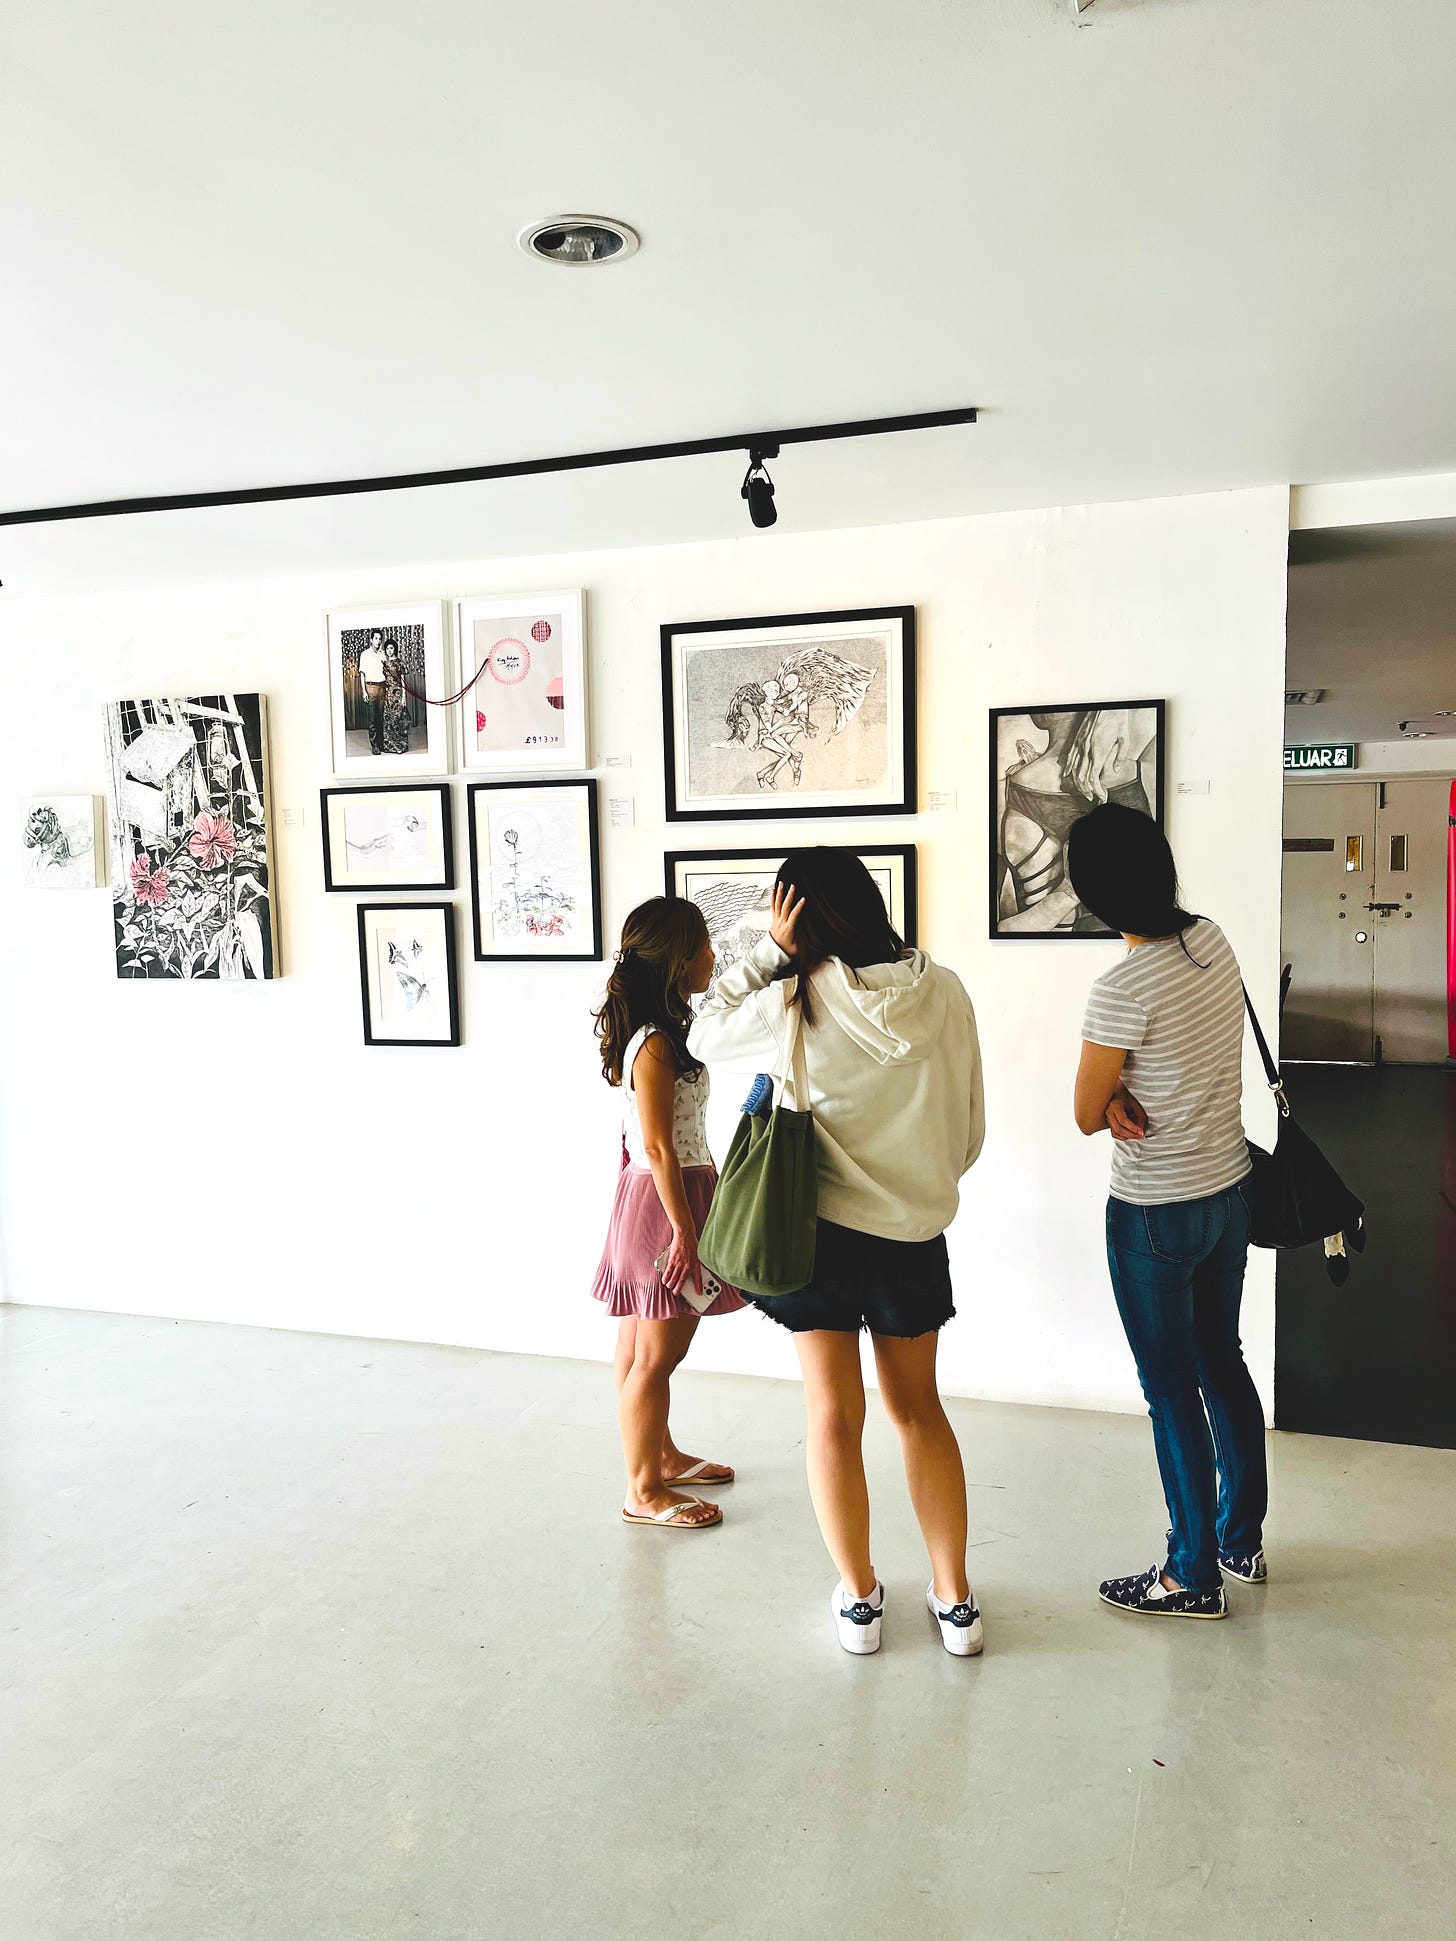 image: a photo of 3 people standing in front of different artworks in the gallery.